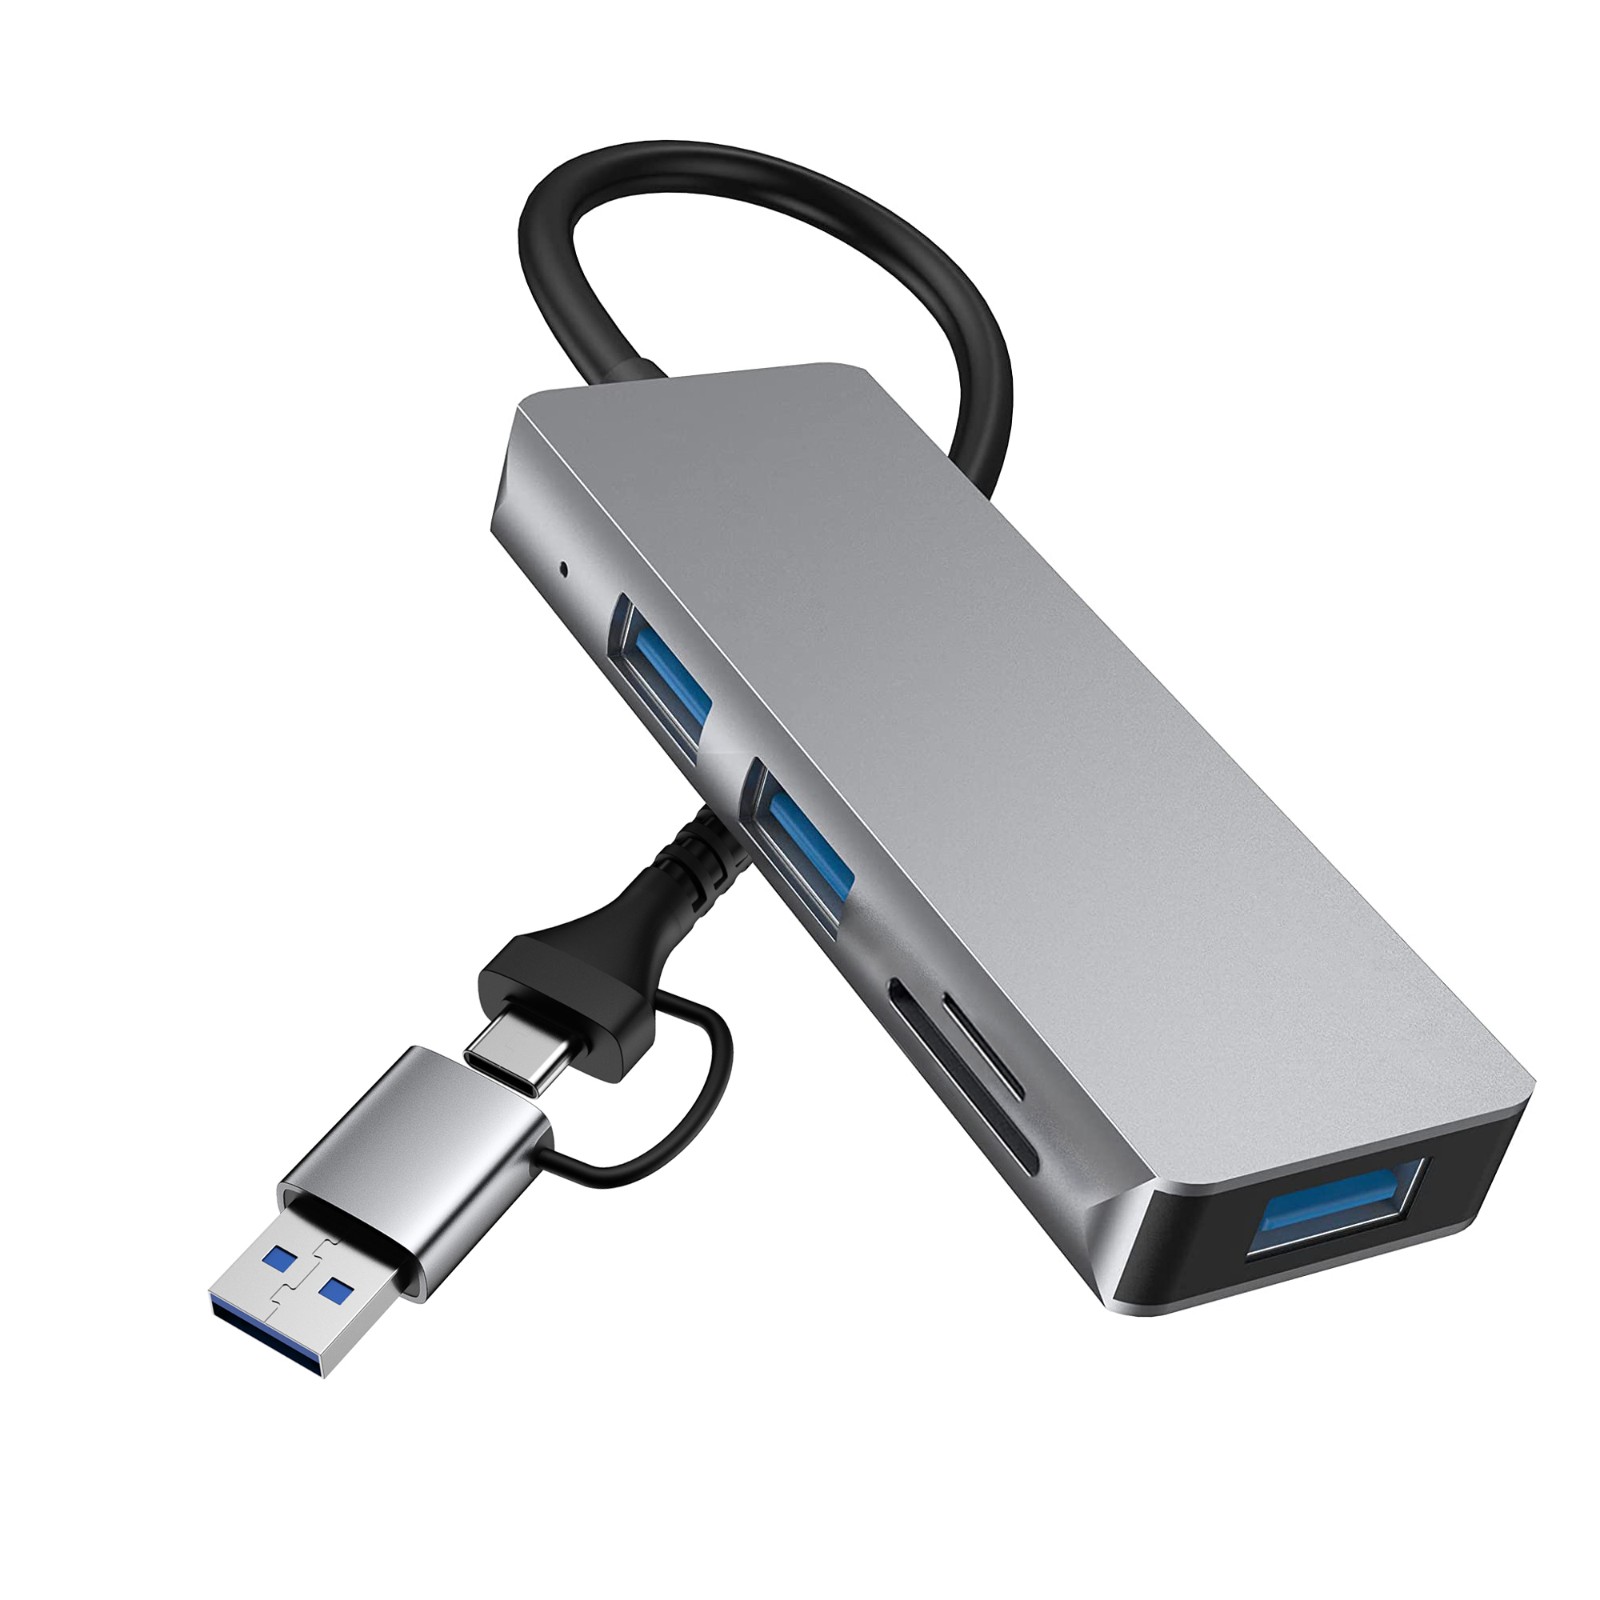 2in1 Aluminum USB 3.0 Hub  with Card reader